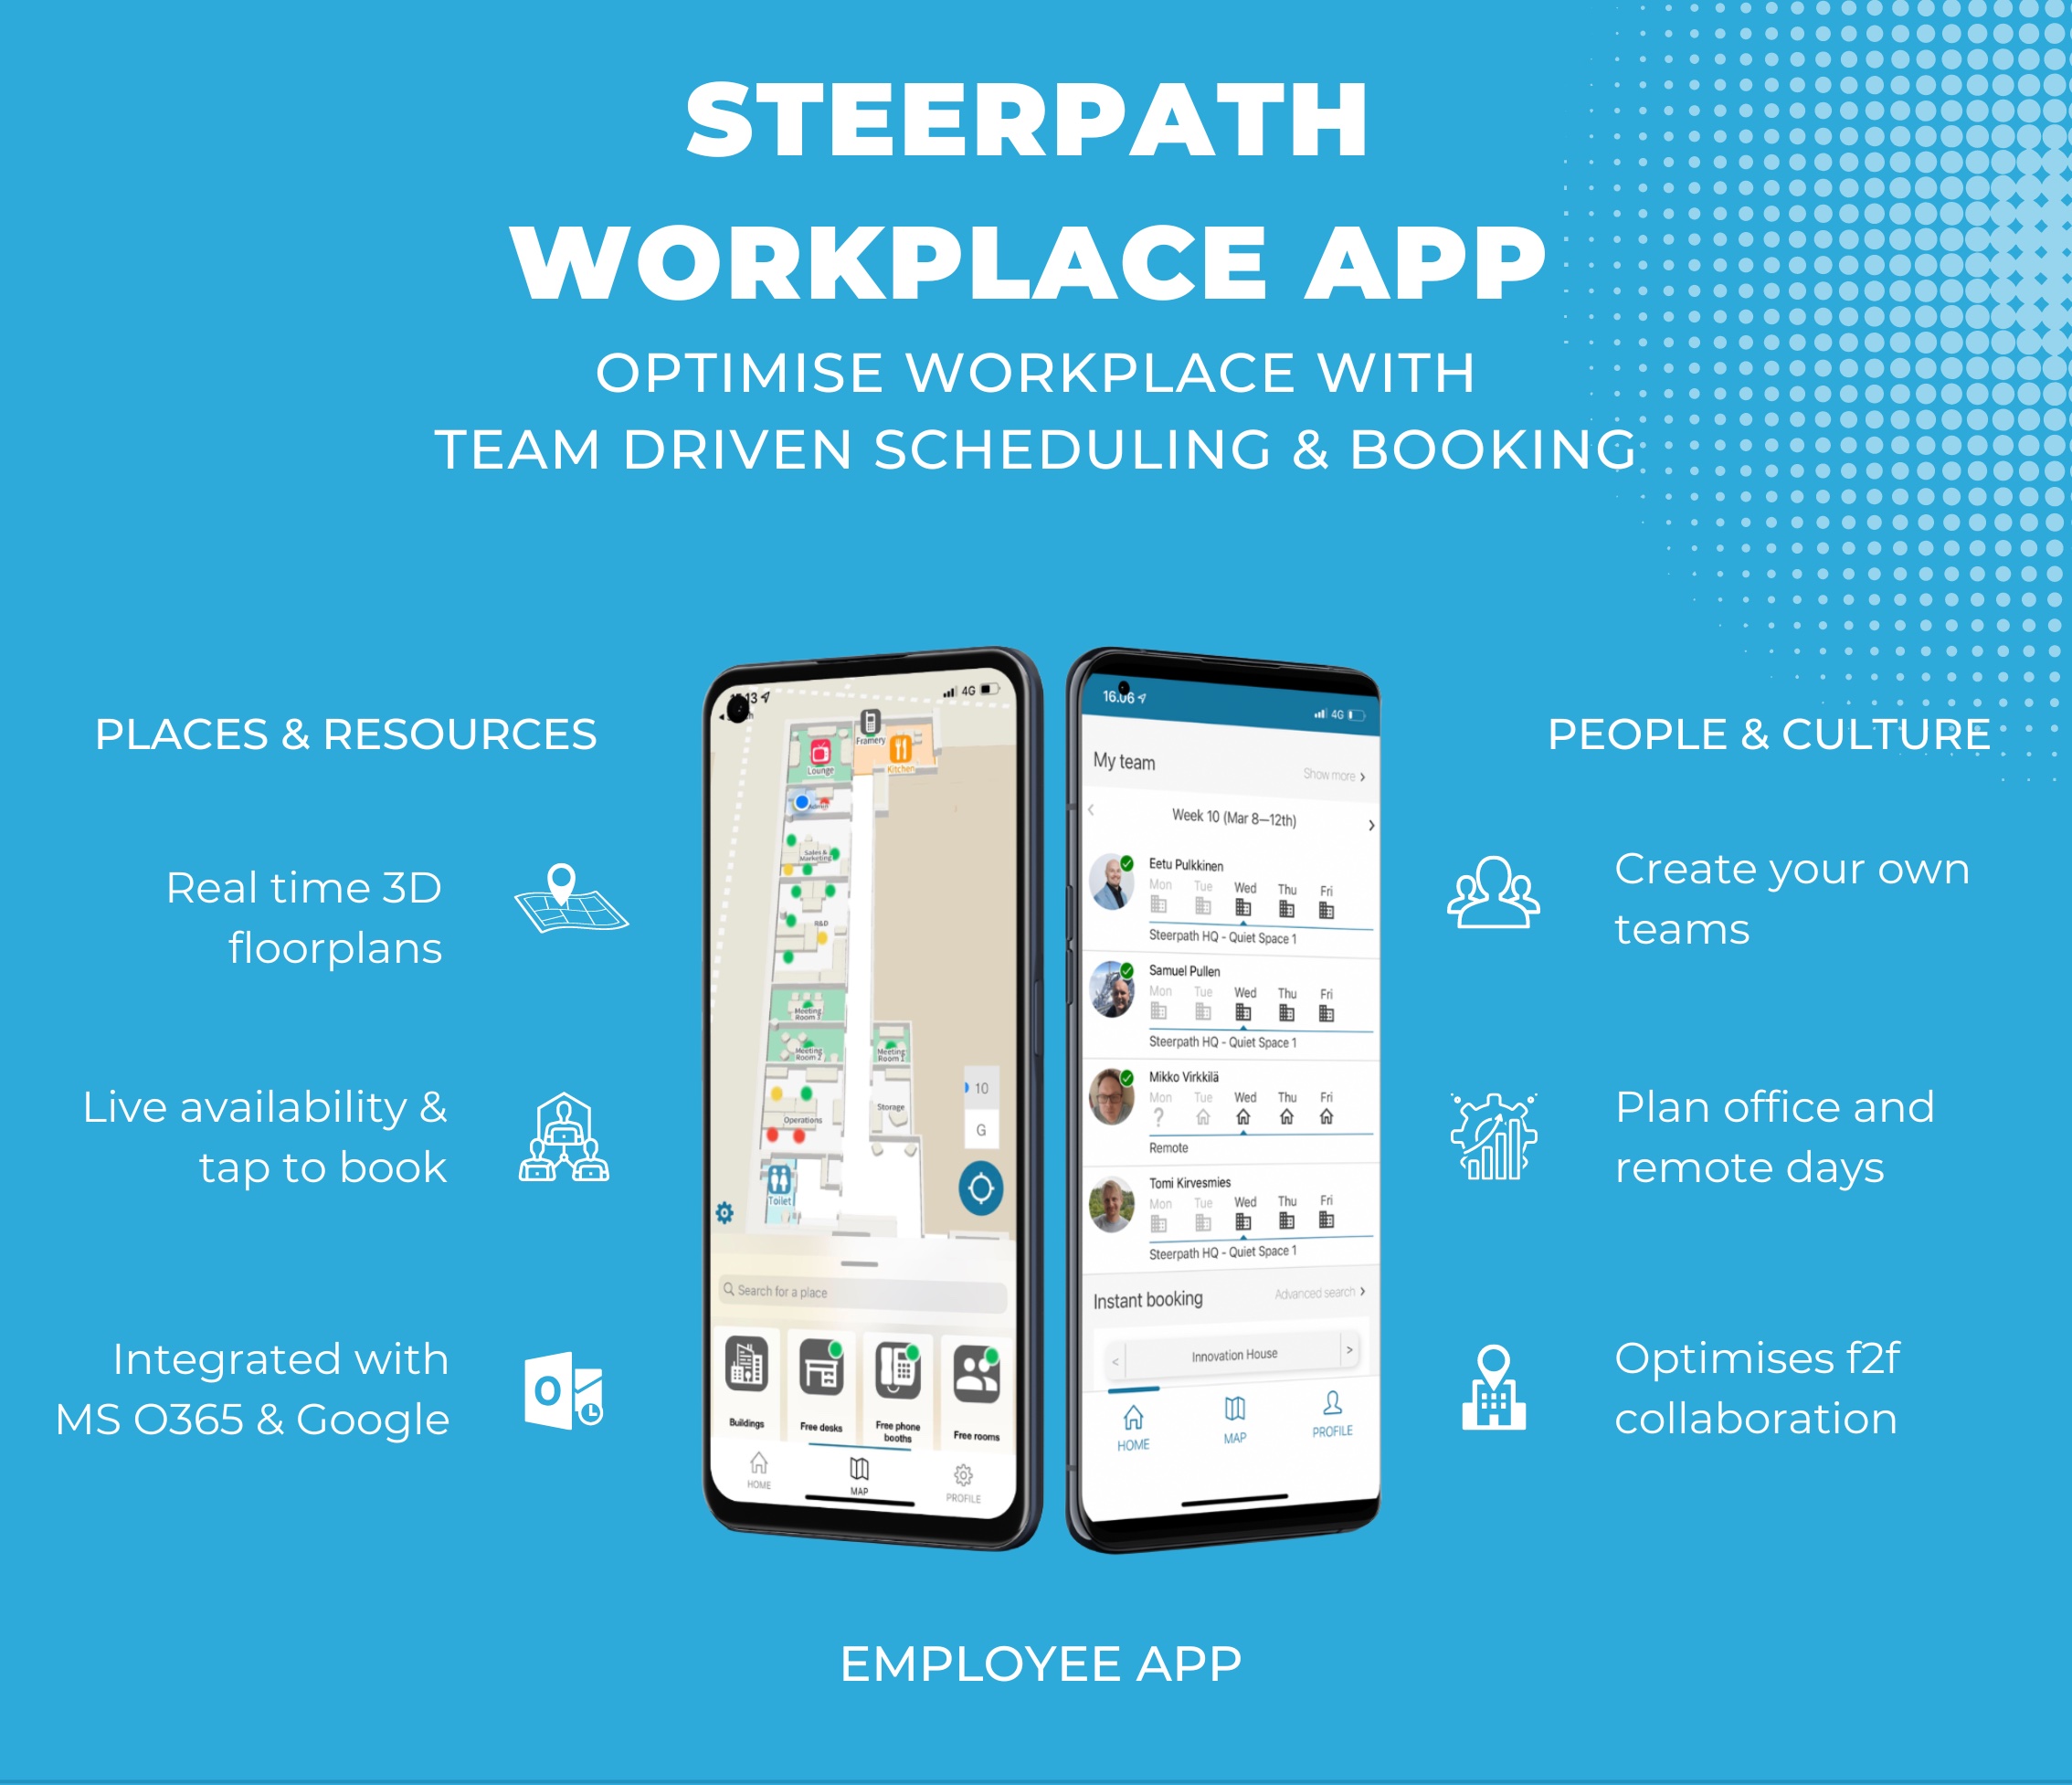 Support employee and team driven office usage with Steerpath workplace app that combines best sides of HR & FM softwares into one modern platform for optimising office & remote work of teams.